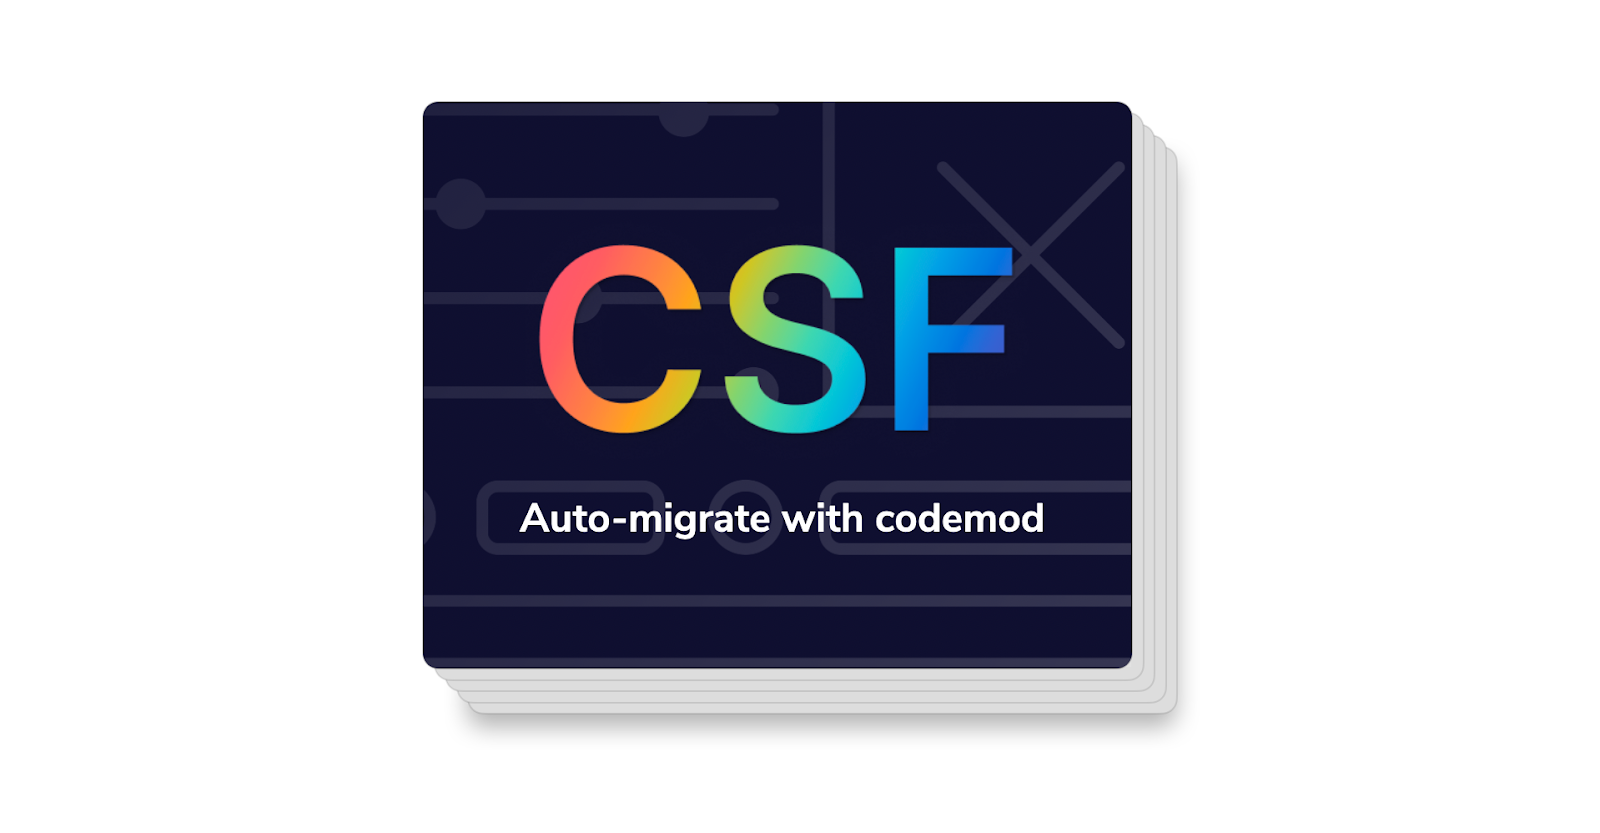 CSF – Auto-migrate with codemod